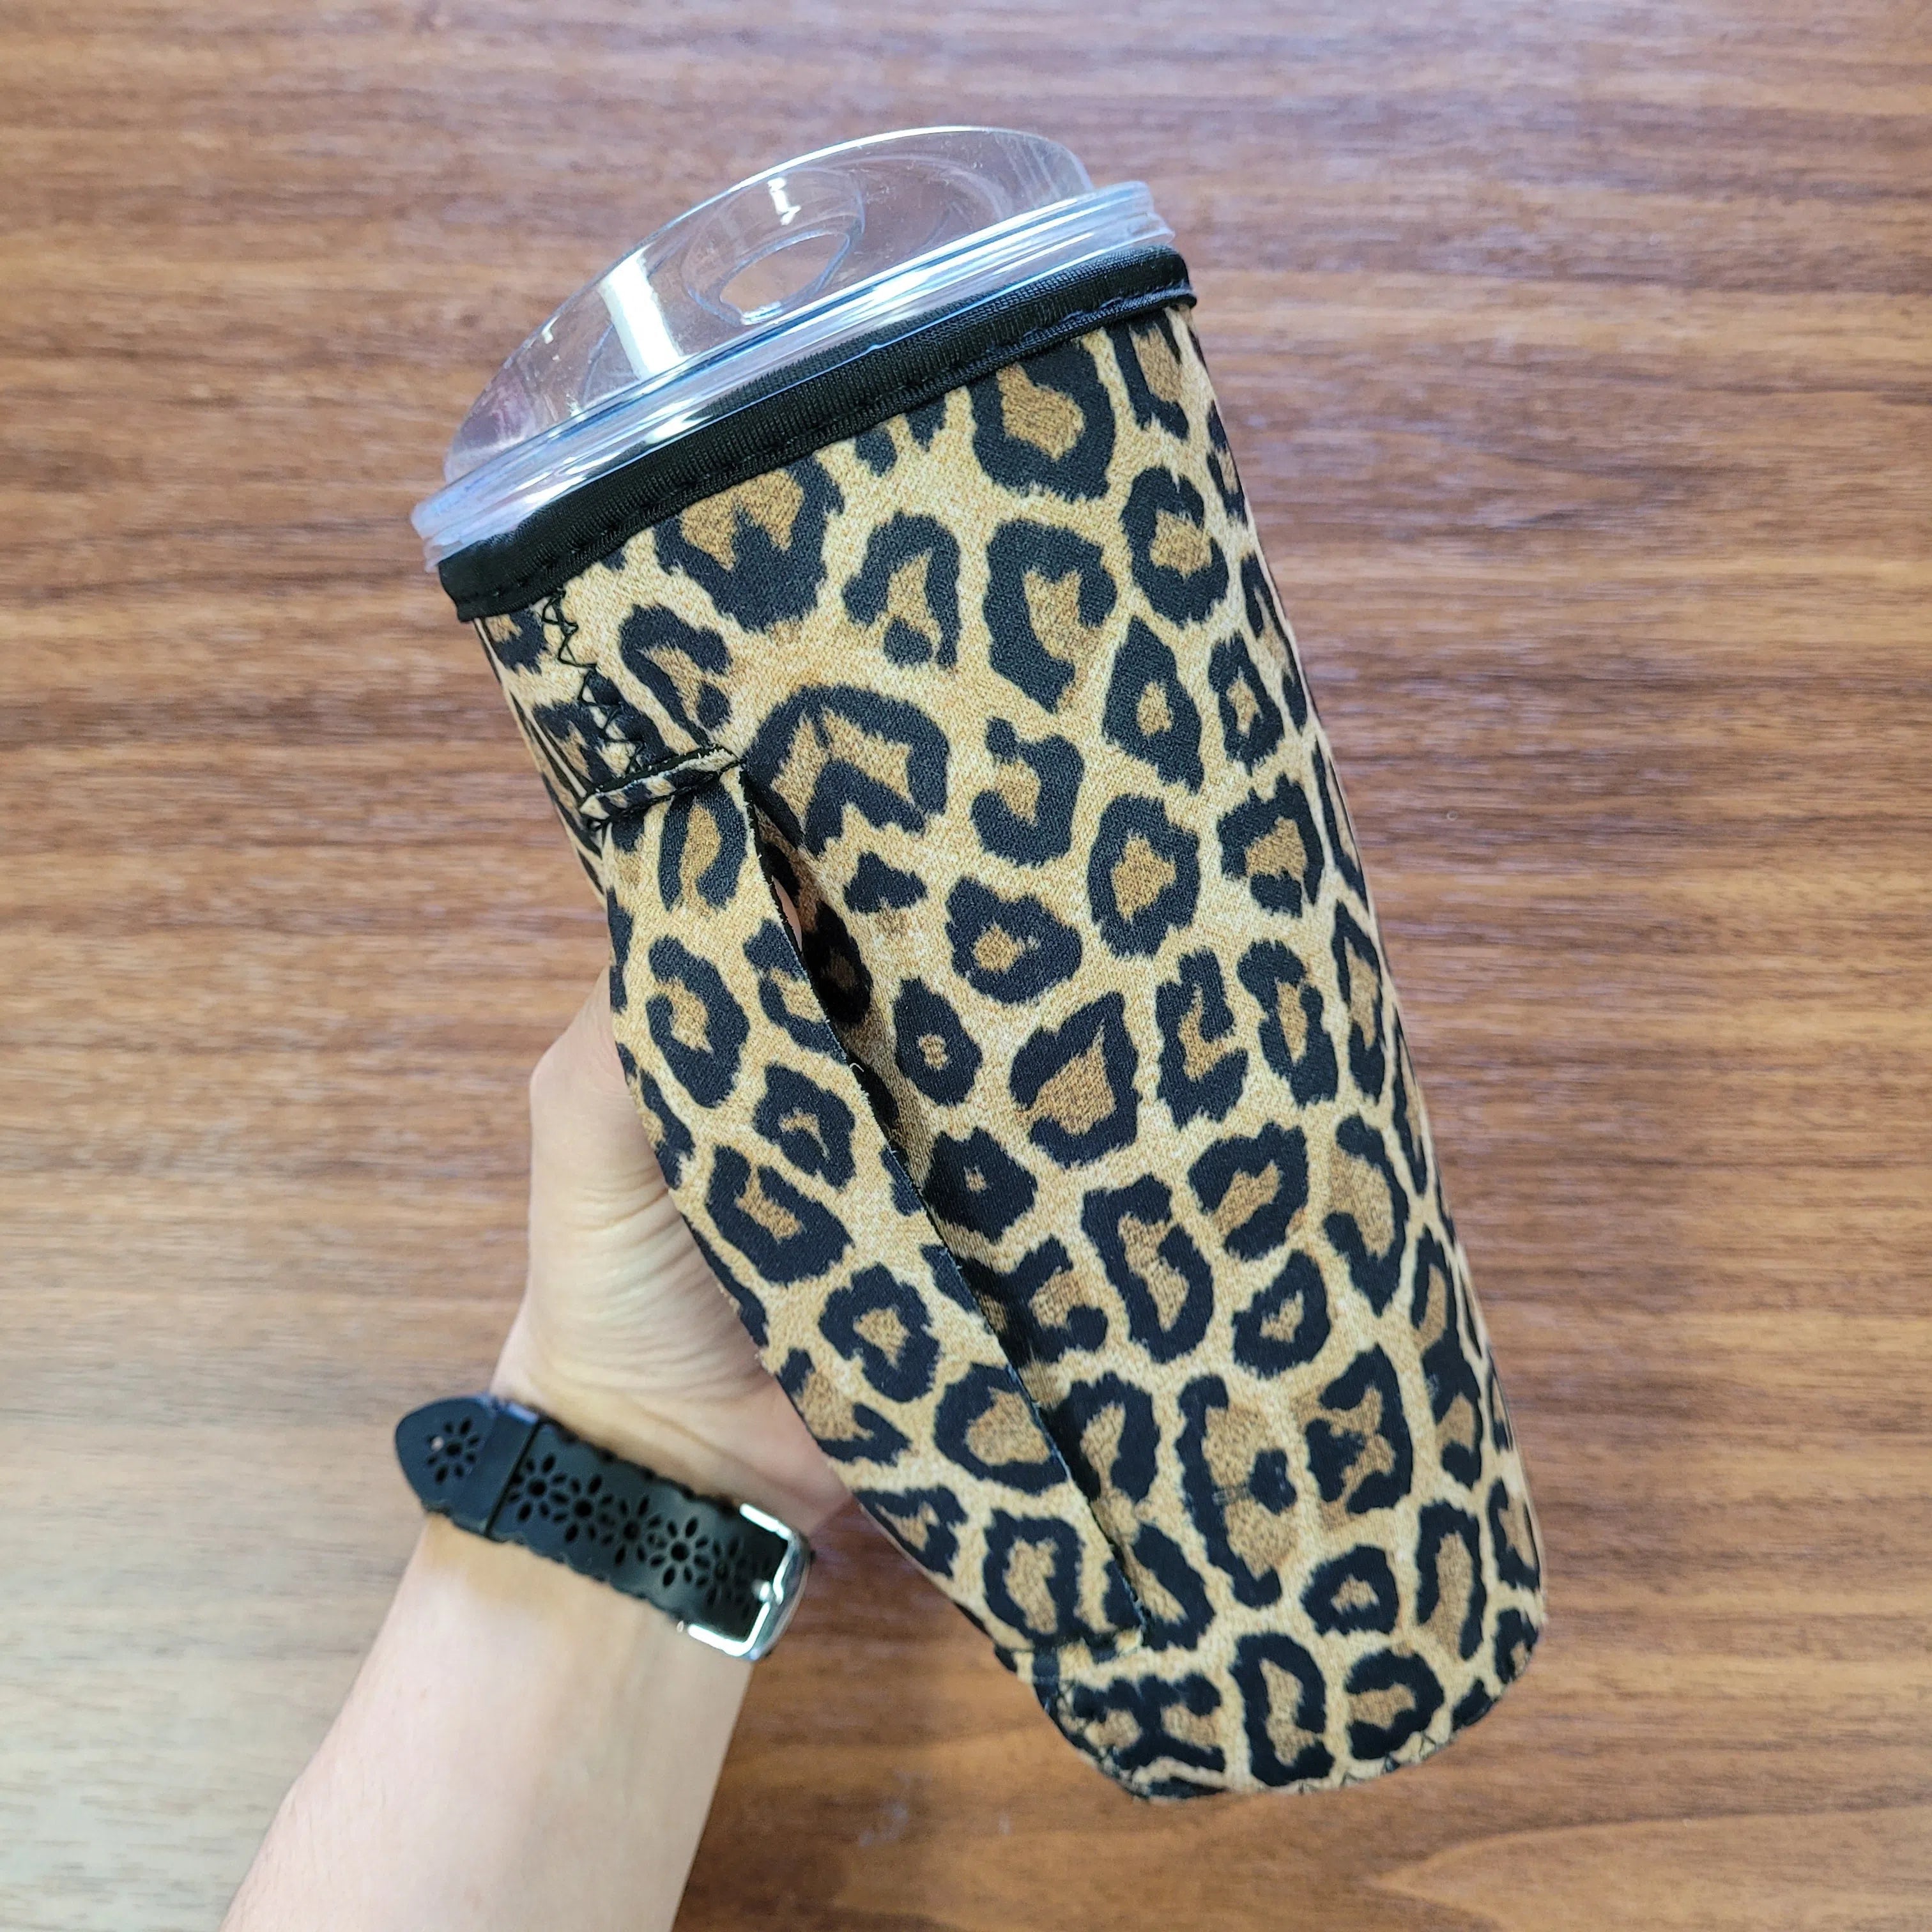 Shop Jumbo Coffee Coozie w Handle-Cup Sleeves at Ruby Joy Boutique, a Women's Clothing Store in Pickerington, Ohio